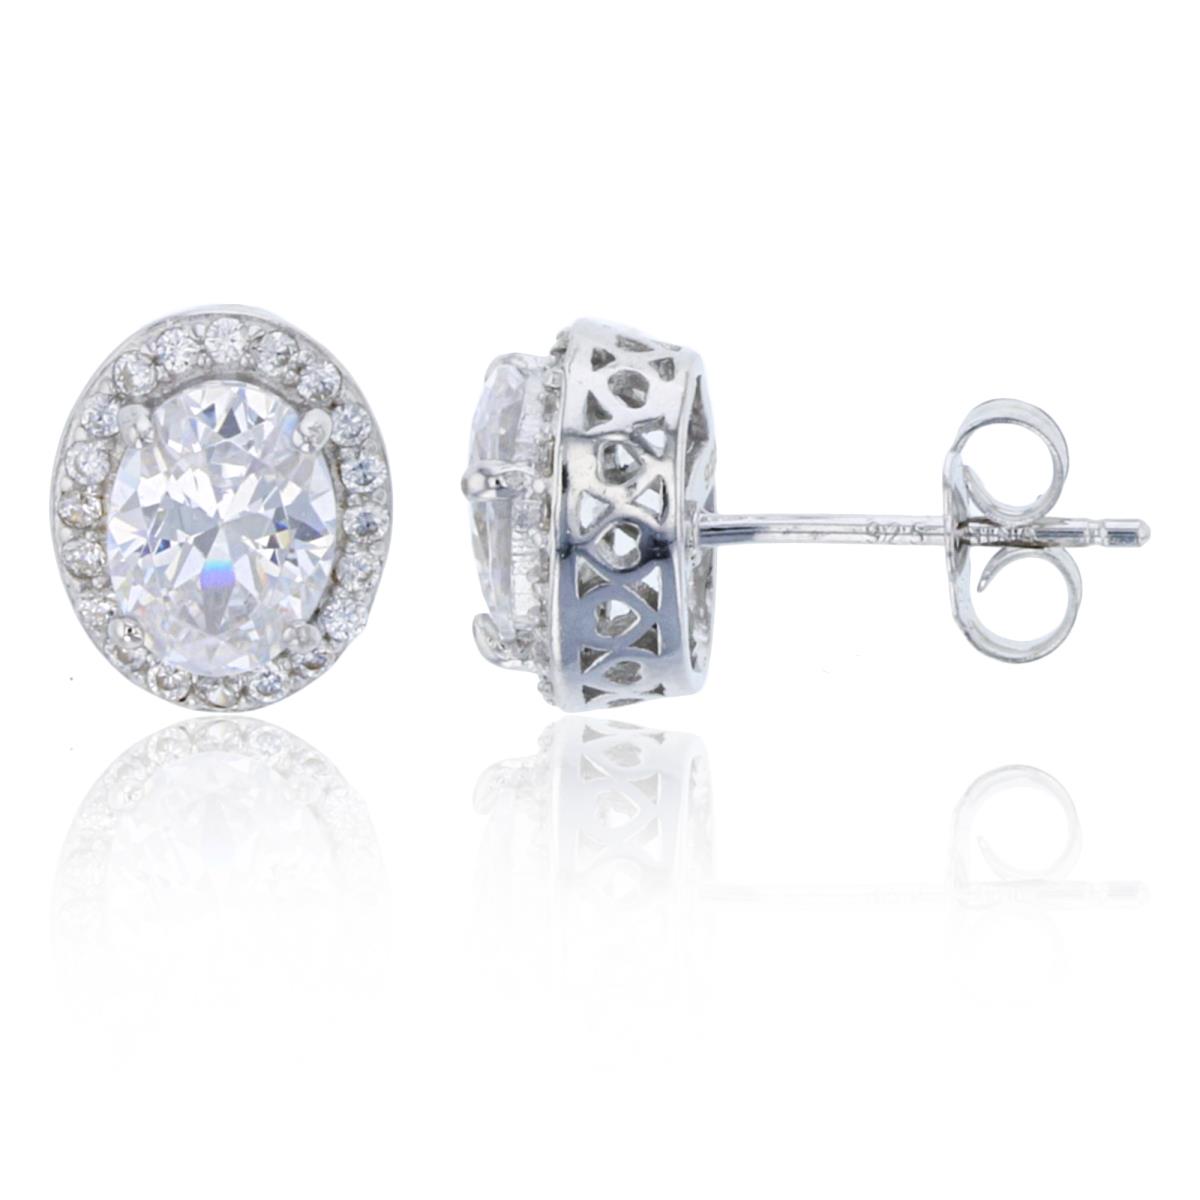 Sterling Silver 8x6mm Oval Pave Stud Earring